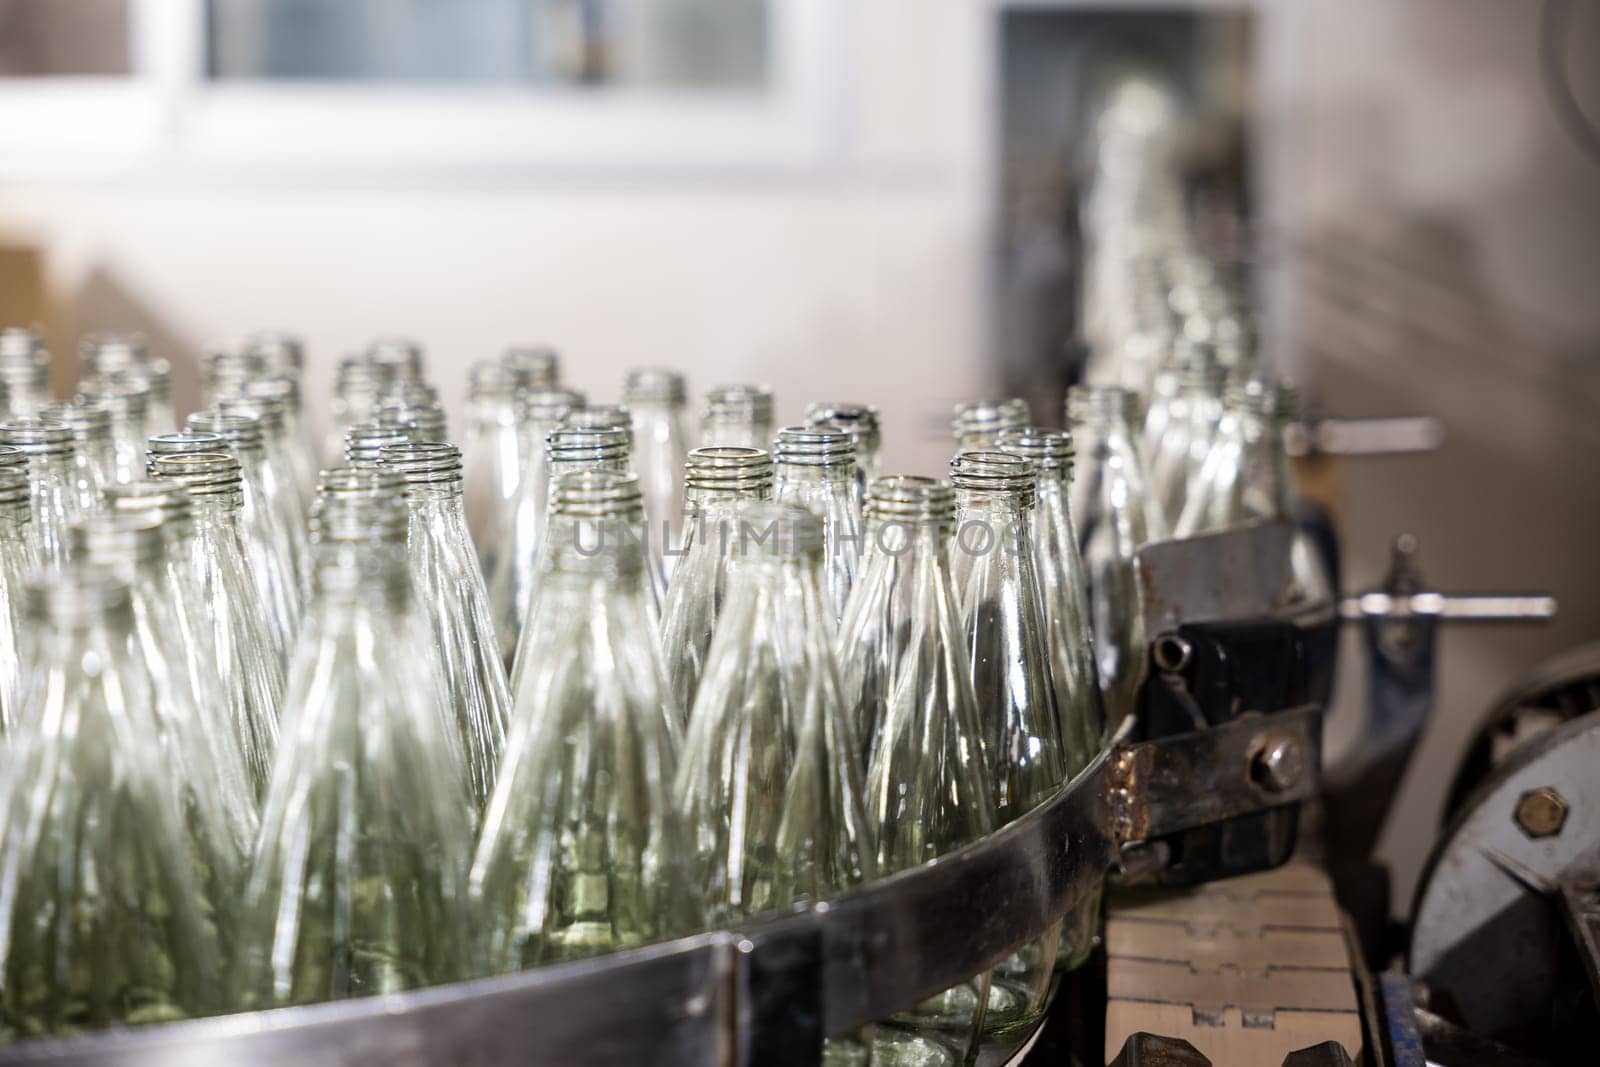 Empty glass bottles on a conveyor indicate a modern distillery's alcoholic beverage production and bottling by Sorapop